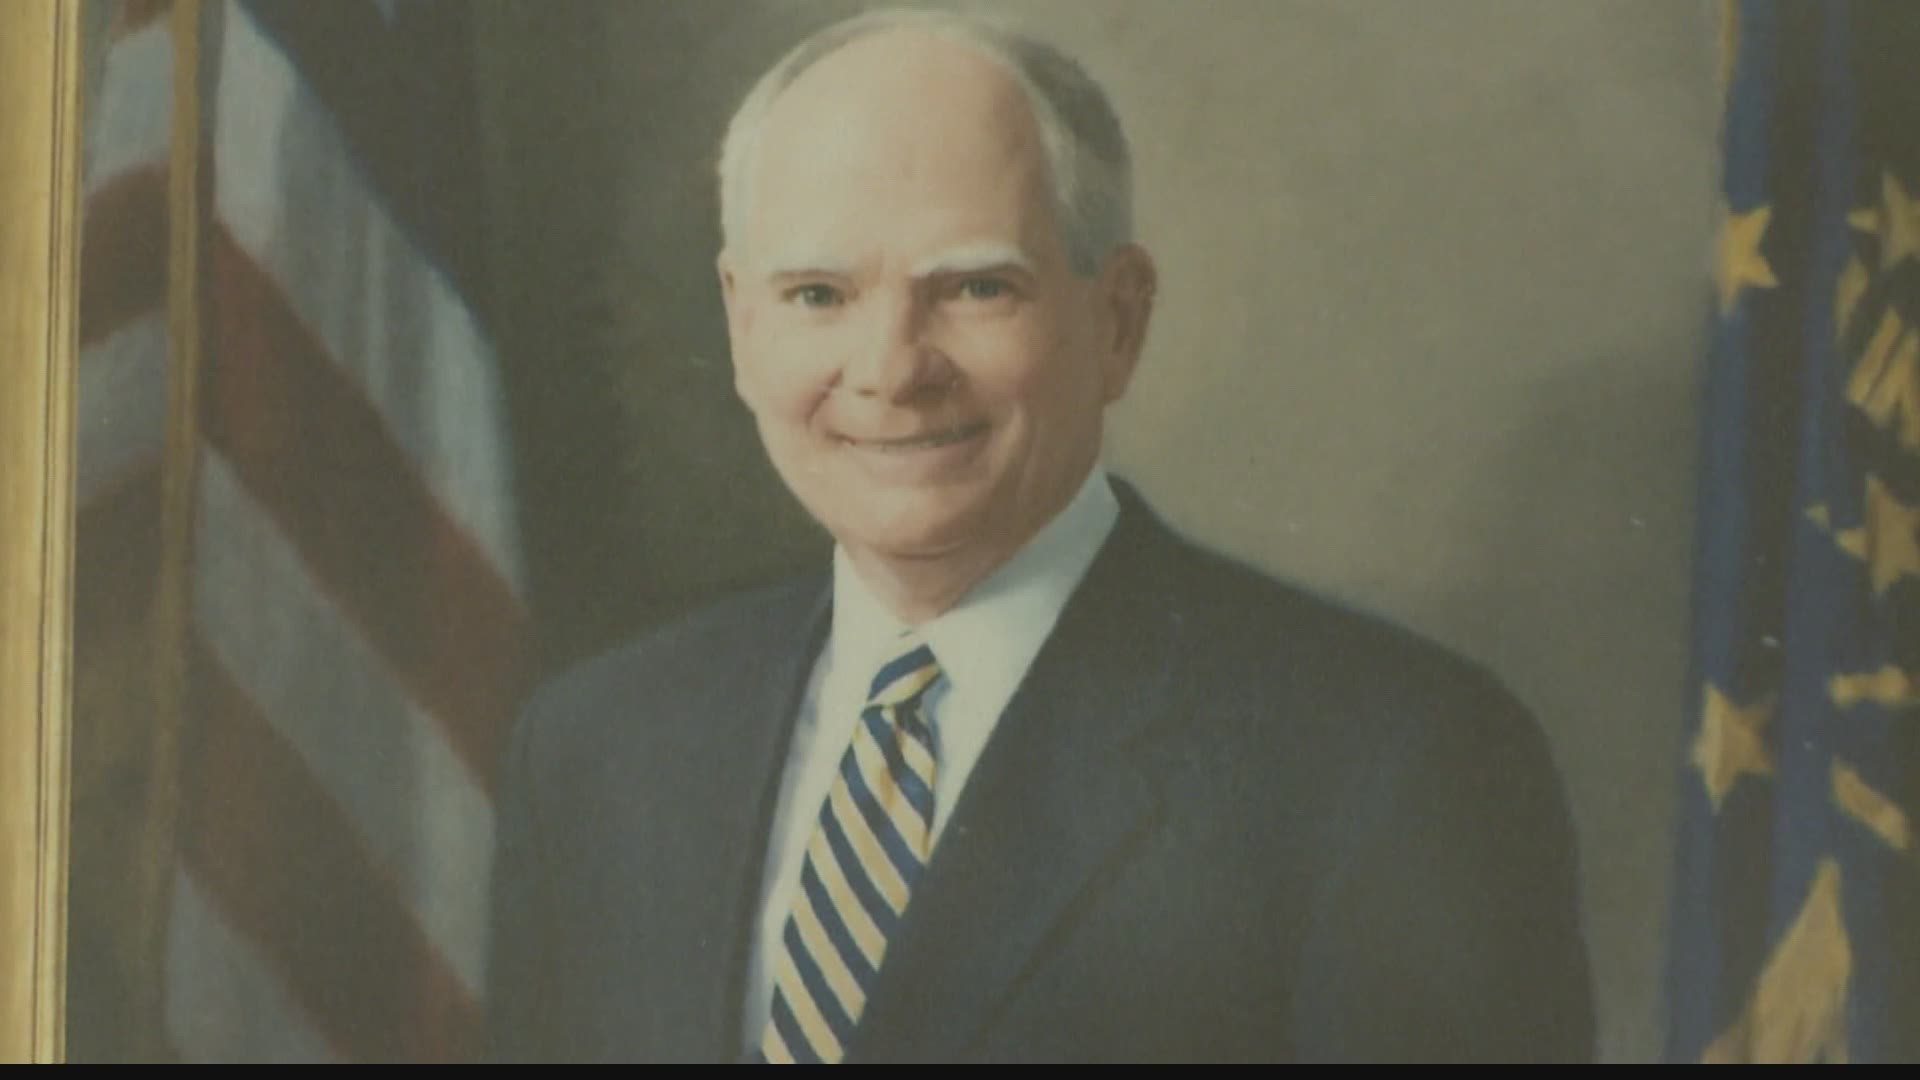 Hoosiers are mourning the loss of former Indiana Governor Joe Kernan.